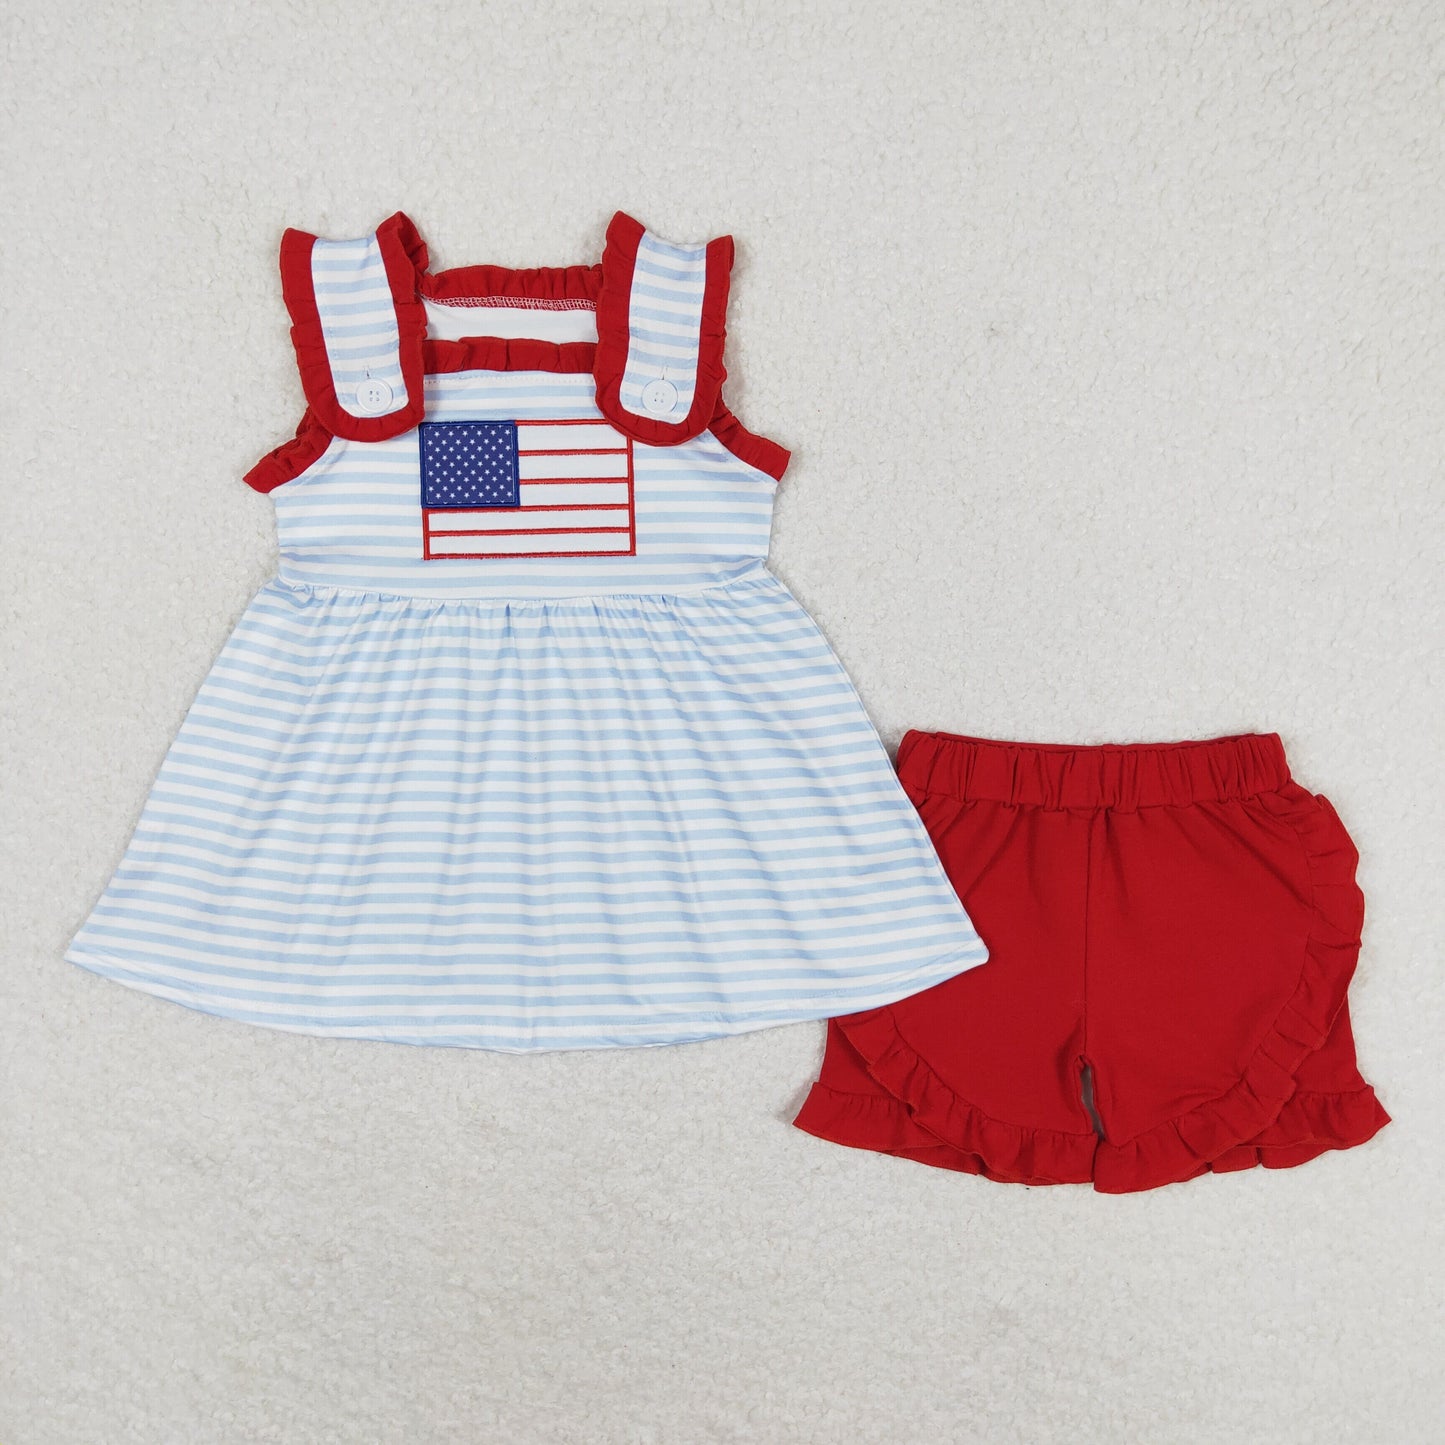 GSSO0755 Baby Girls  July 4th Blue Striped Top matching Red Shorts Set